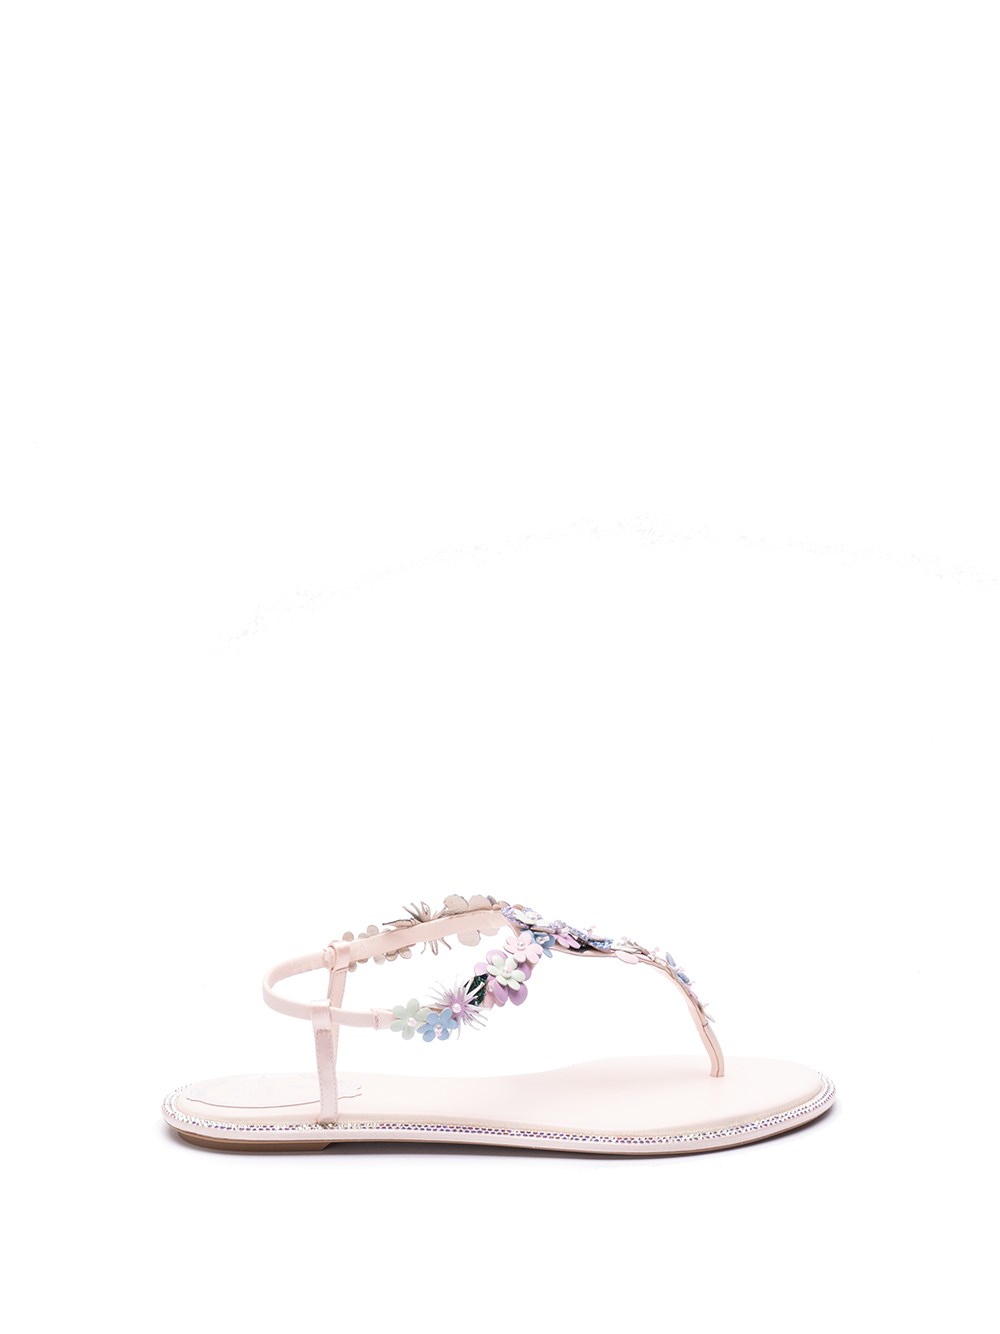 René Caovilla Thong Sandals In Pink